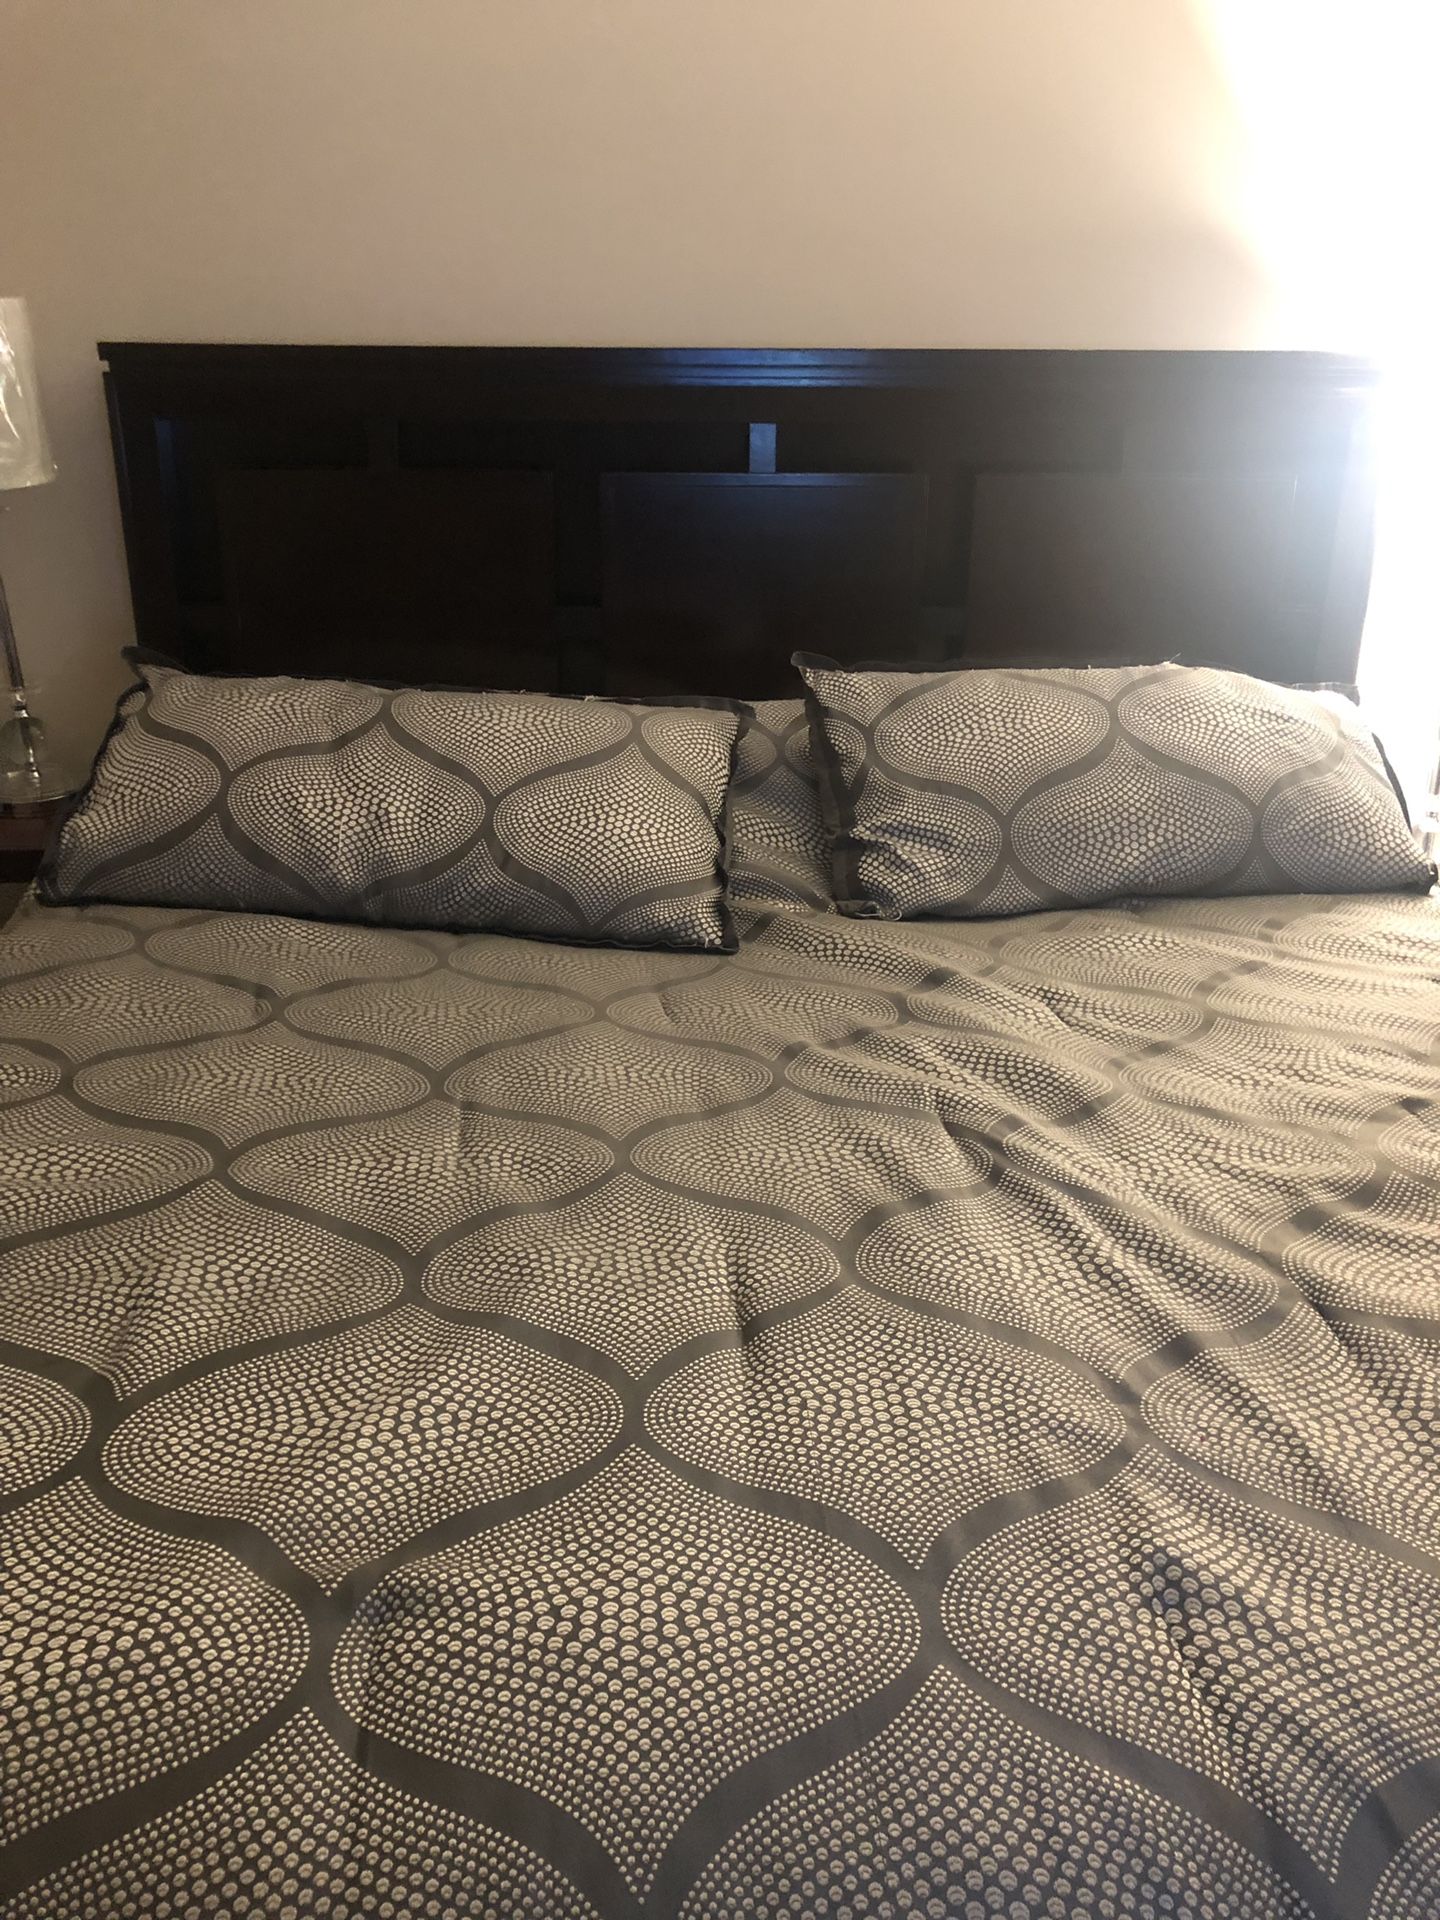 King bed headboard and frame